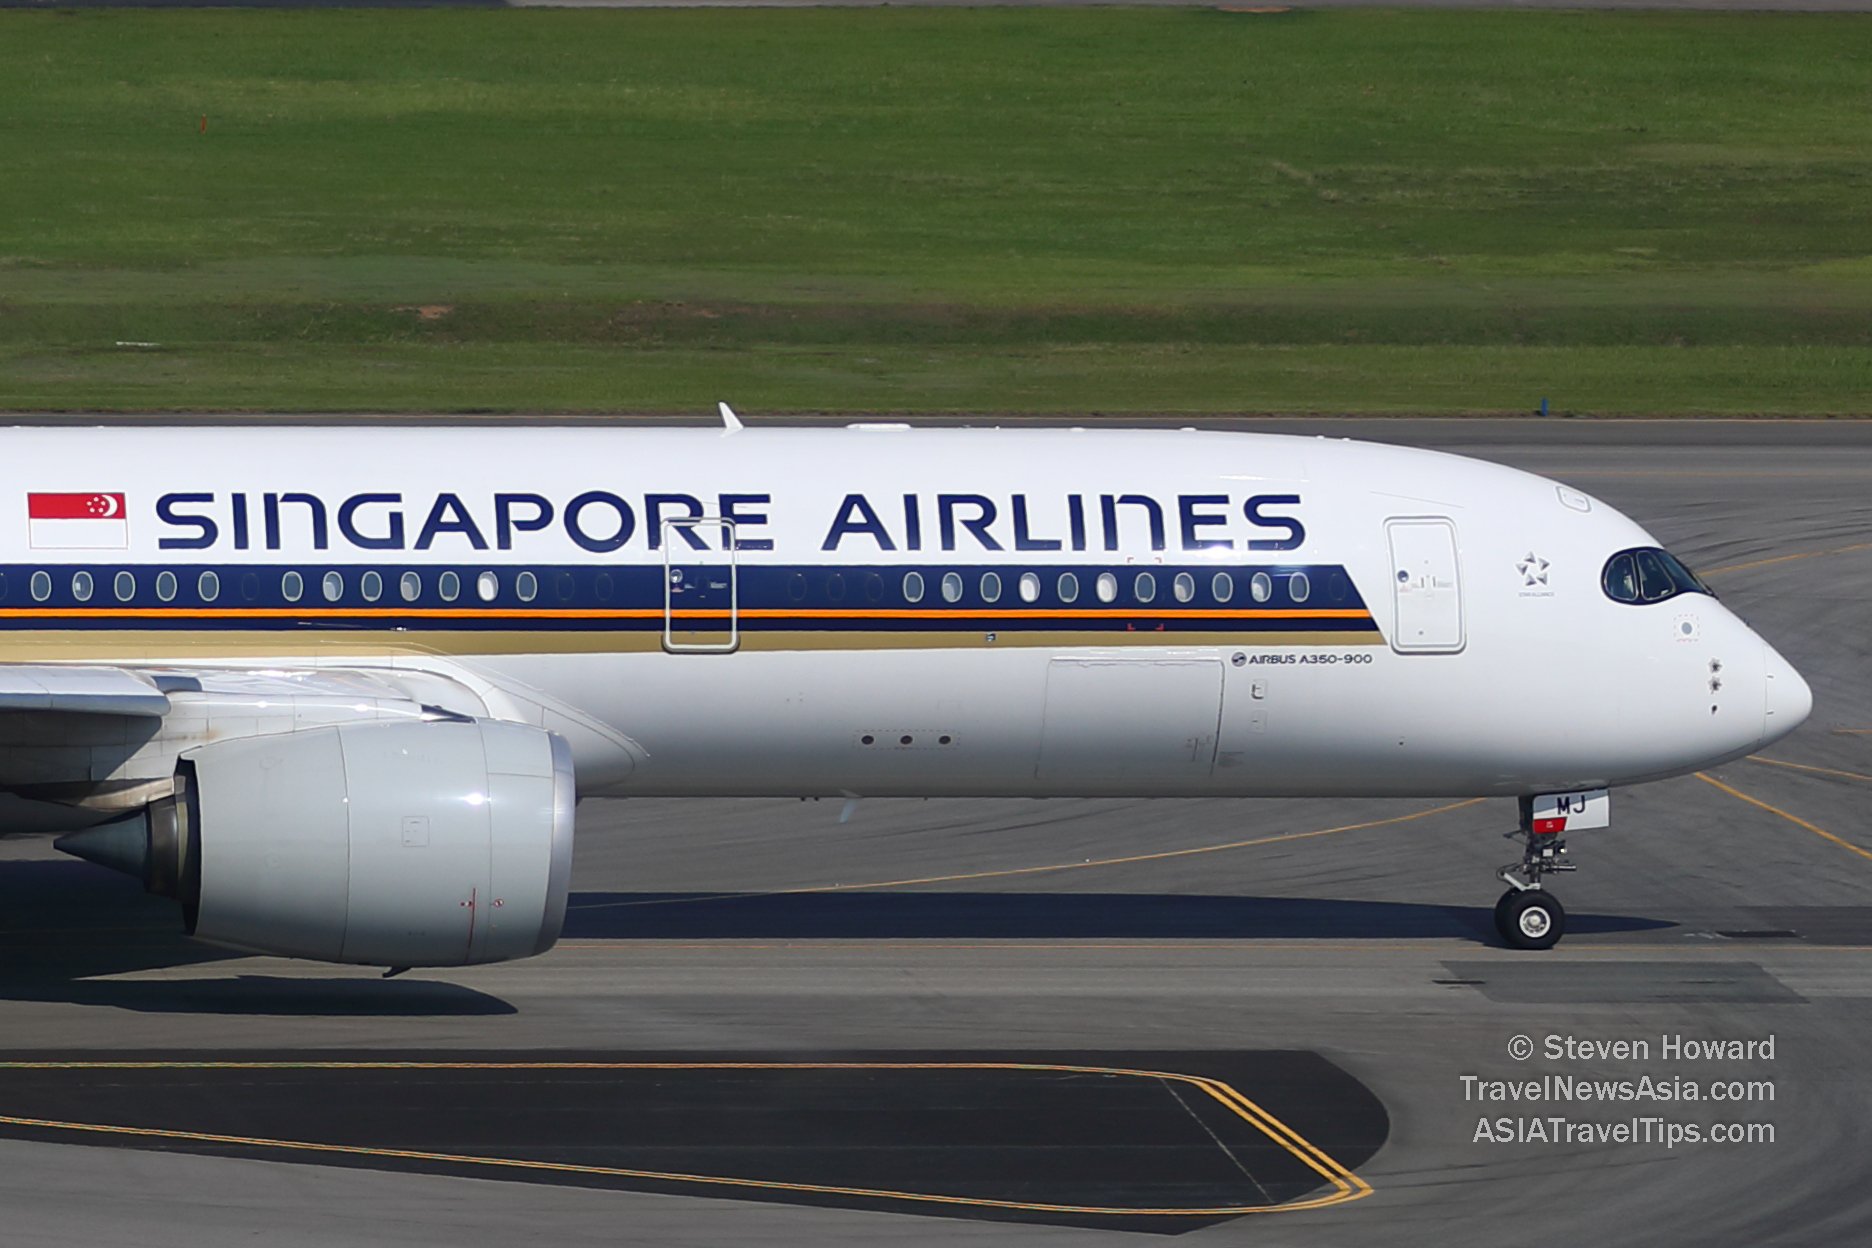 Singapore Airlines A350-900 reg: 9V-SMJ. Picture by Steven Howard of TravelNewsAsia.com Click to enlarge.